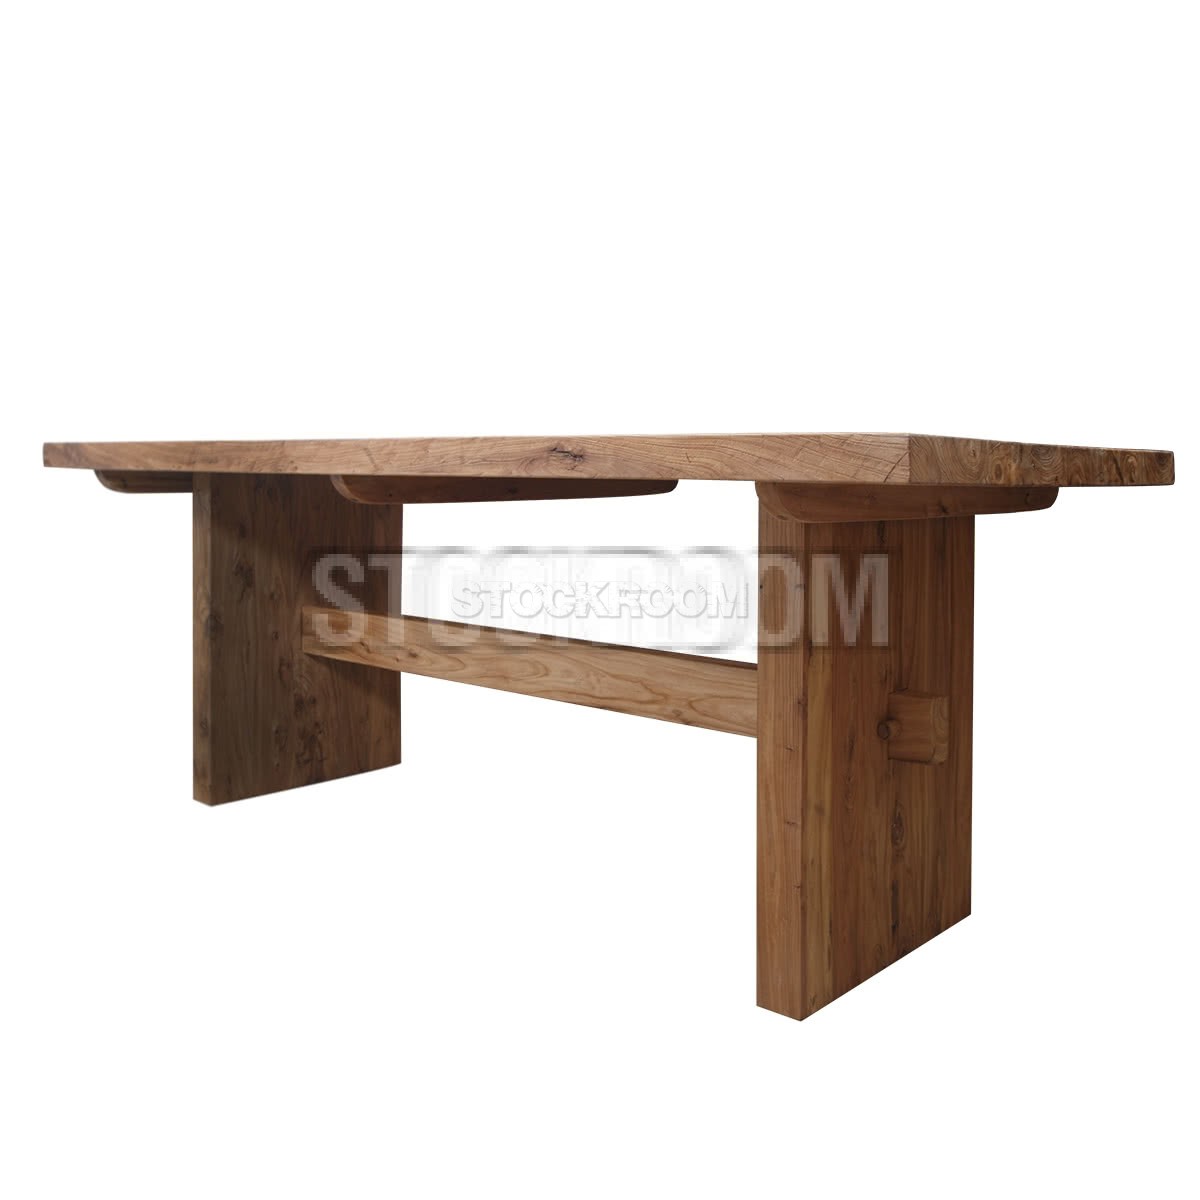 Standford Recycled Solid Elm Wood Dining Table Set - 180cm